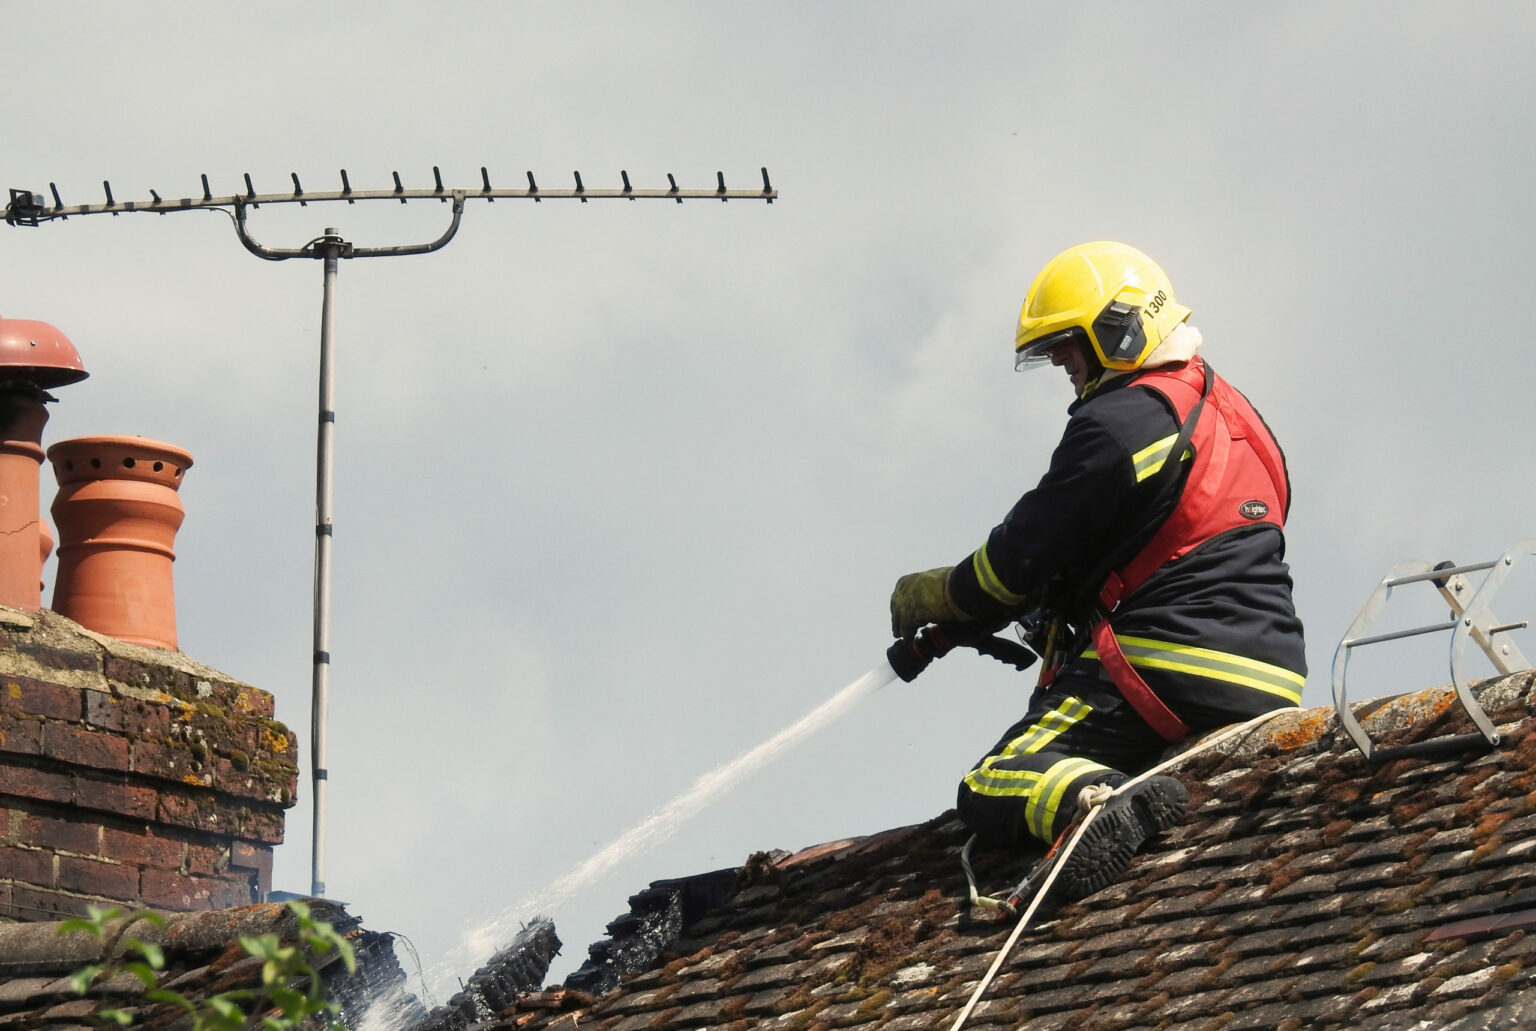 Wiltshire,,Uk.,August,13,2018.,A,Firefighter,On,A,Roof